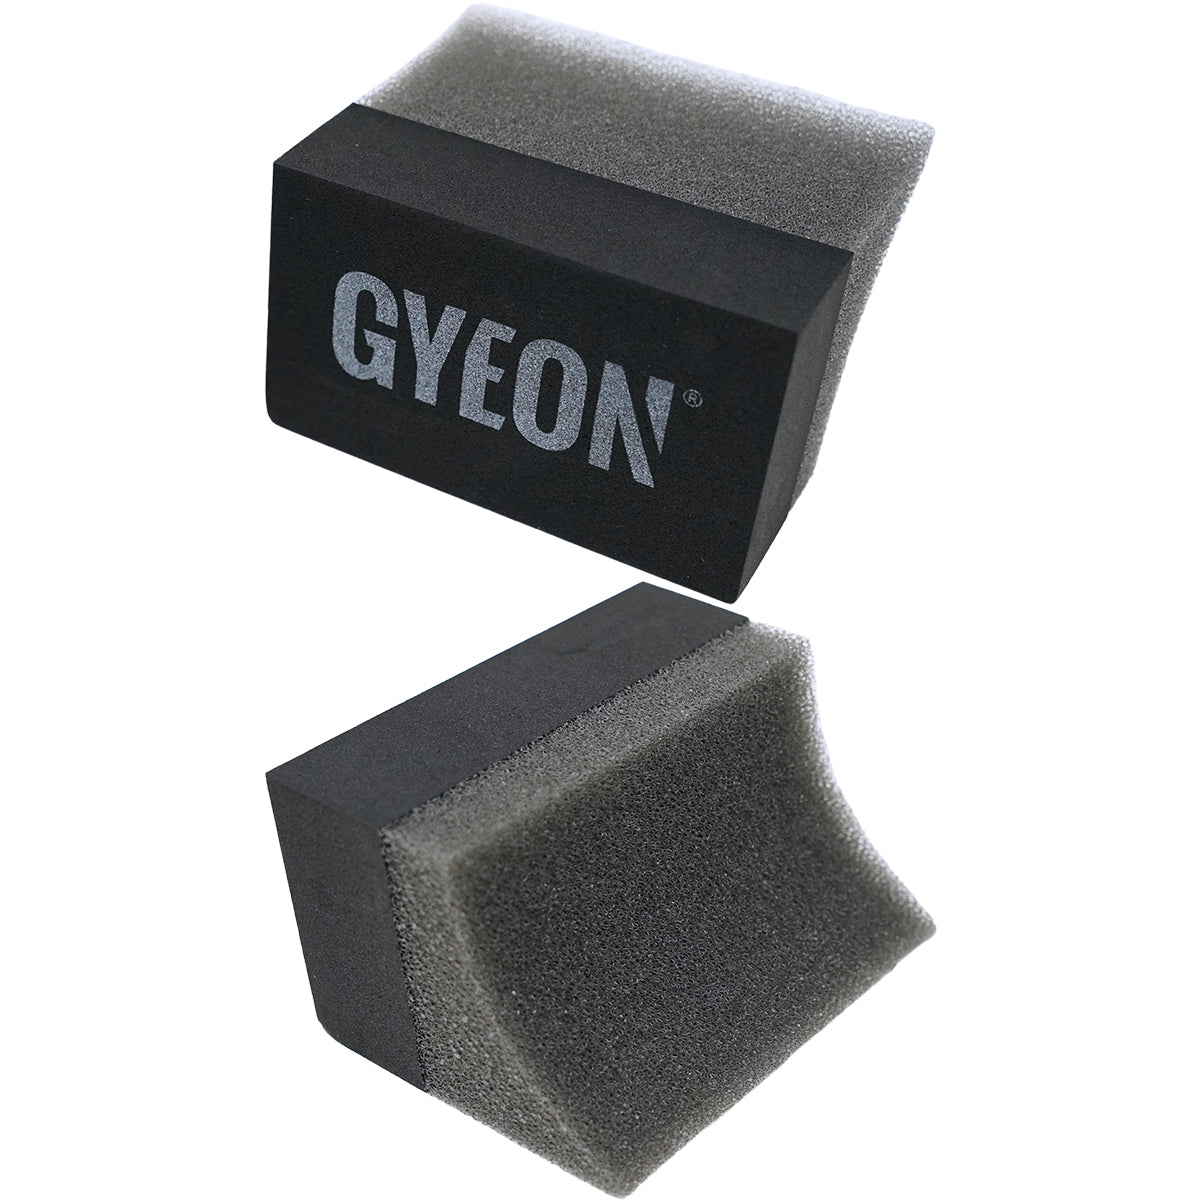 Gyeon Q2M Tire Applicator - Large, Pack of 2